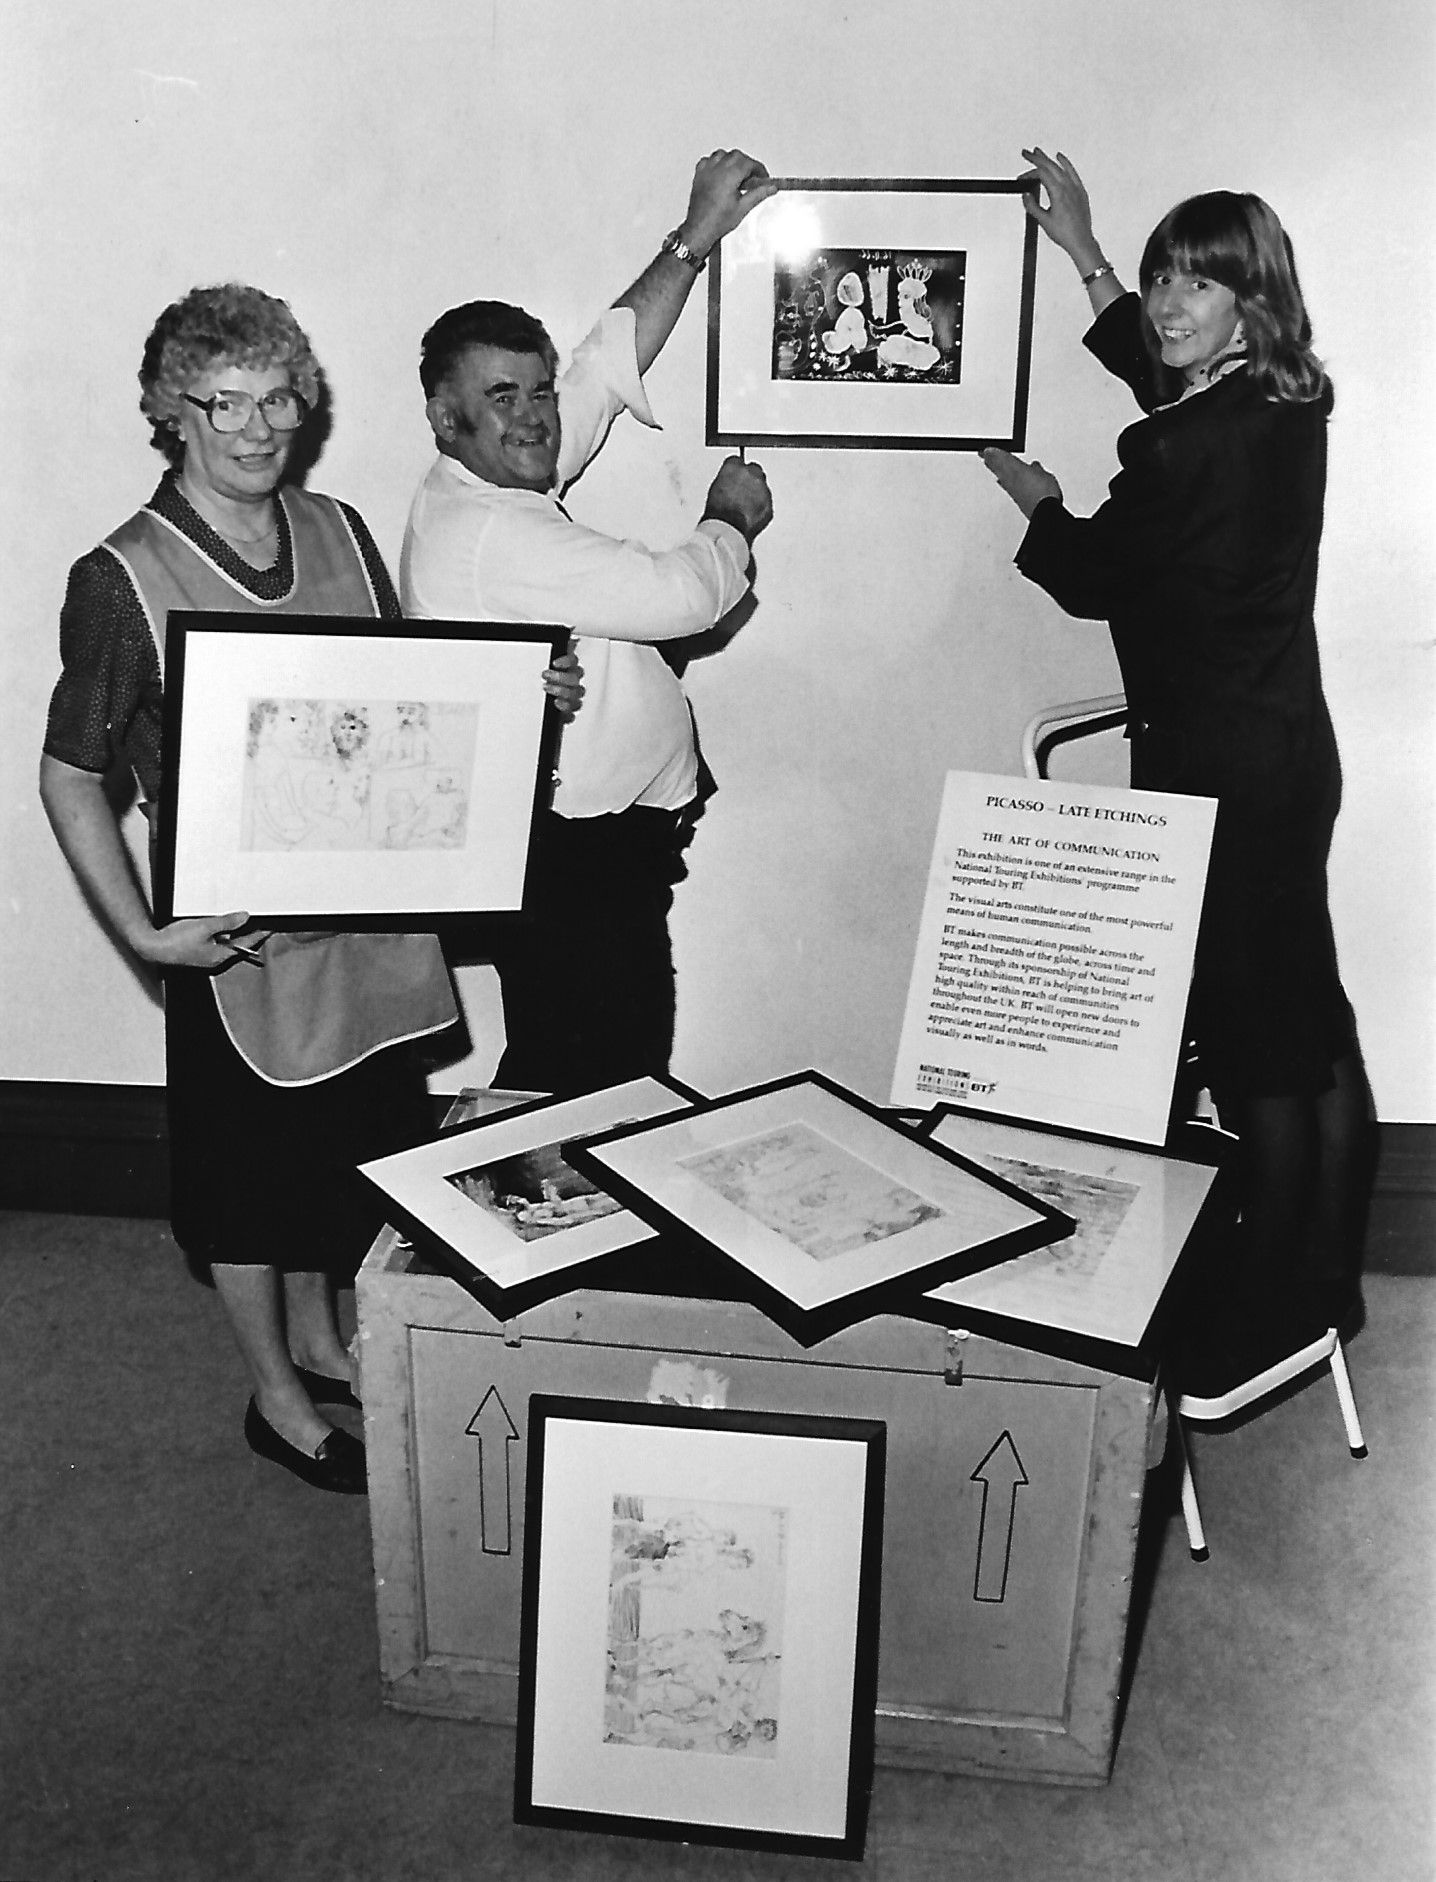 Southport in November 1994. An exhibition on Picasso - Late Etchings goes on display in Southport. It was one of an extensive range in the National Touring Exhibitions, supported by BT